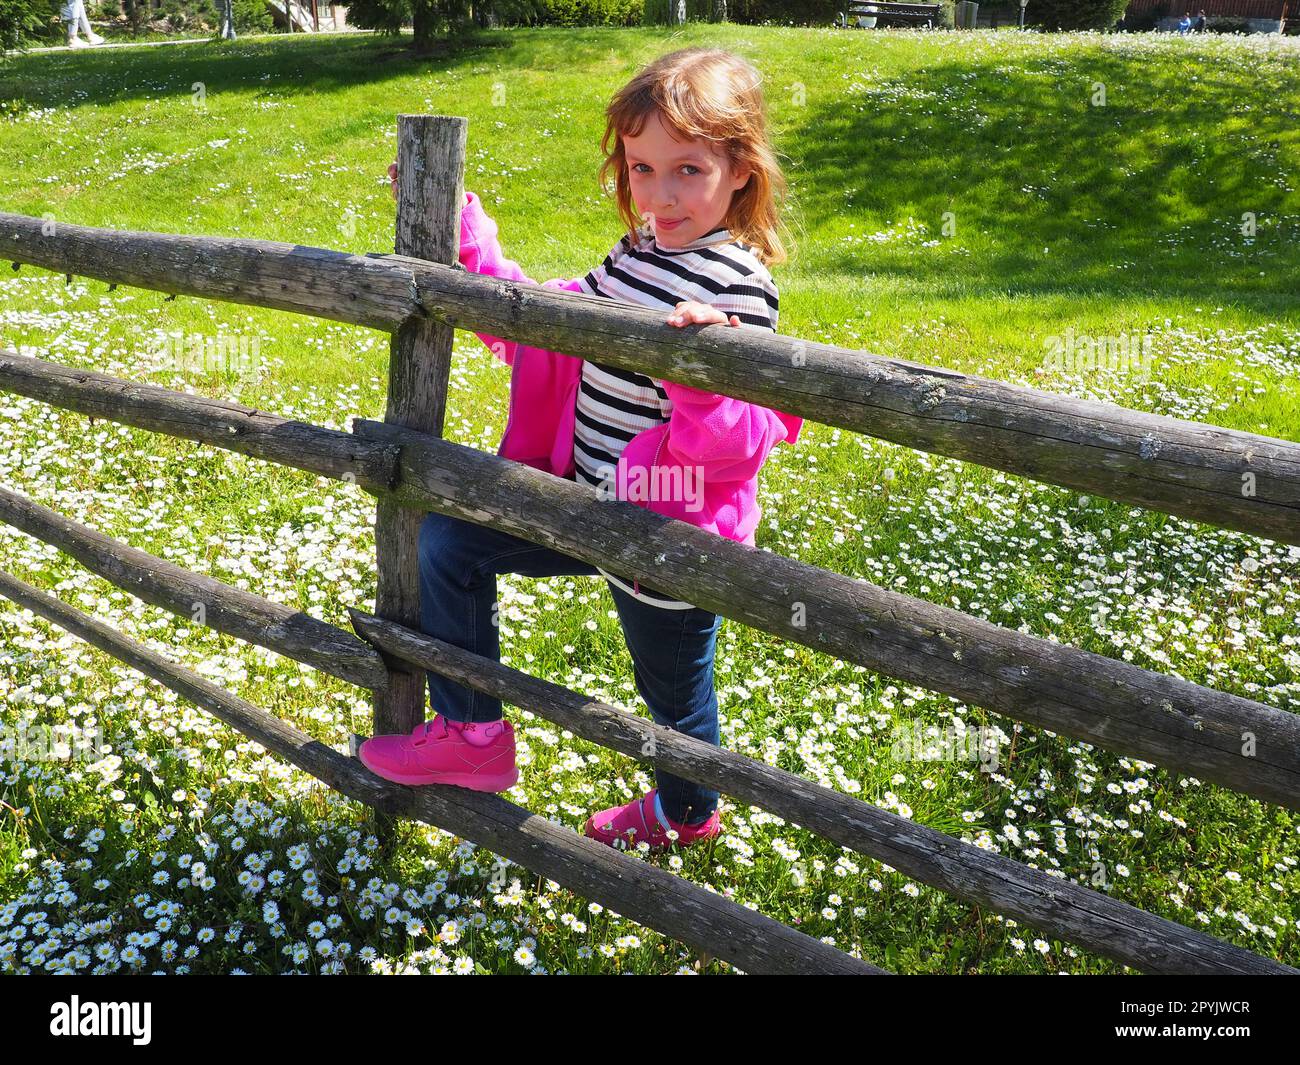 Stanisici, Bijelina, Bosnia and Herzegovina, April 25, 2021. A 7-year-old girl in a pink sweater, jeans and a striped blouse stands near a wooden rural fence and smiles. Meadow with wildflowers Stock Photo